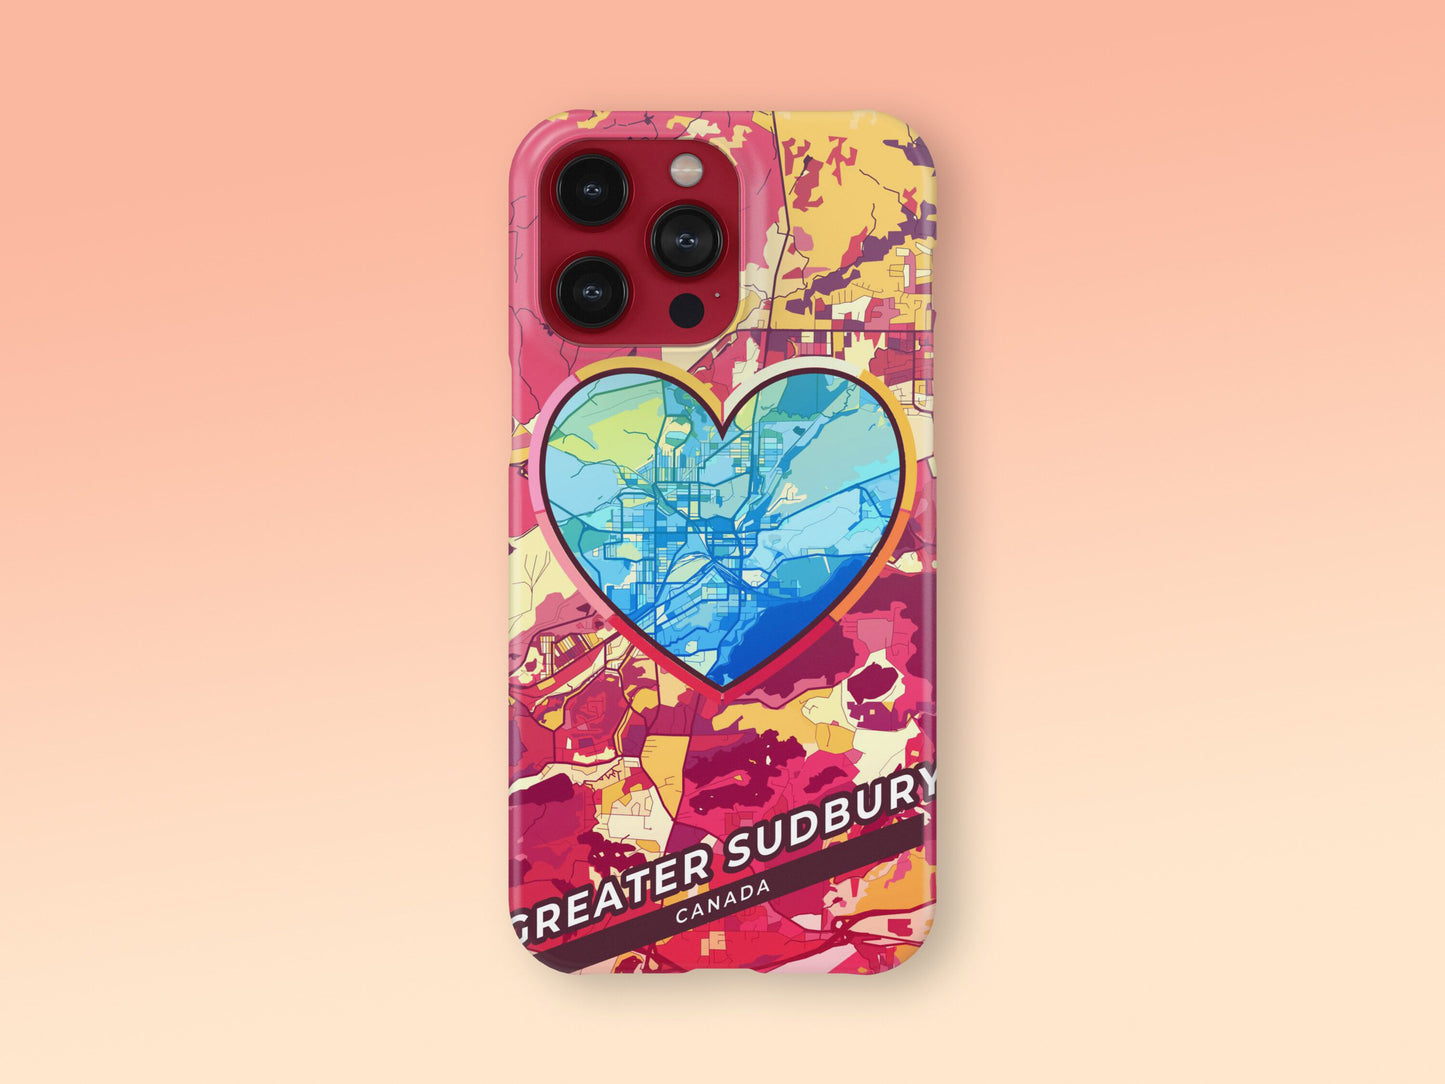 Greater Sudbury Canada slim phone case with colorful icon. Birthday, wedding or housewarming gift. Couple match cases. 2